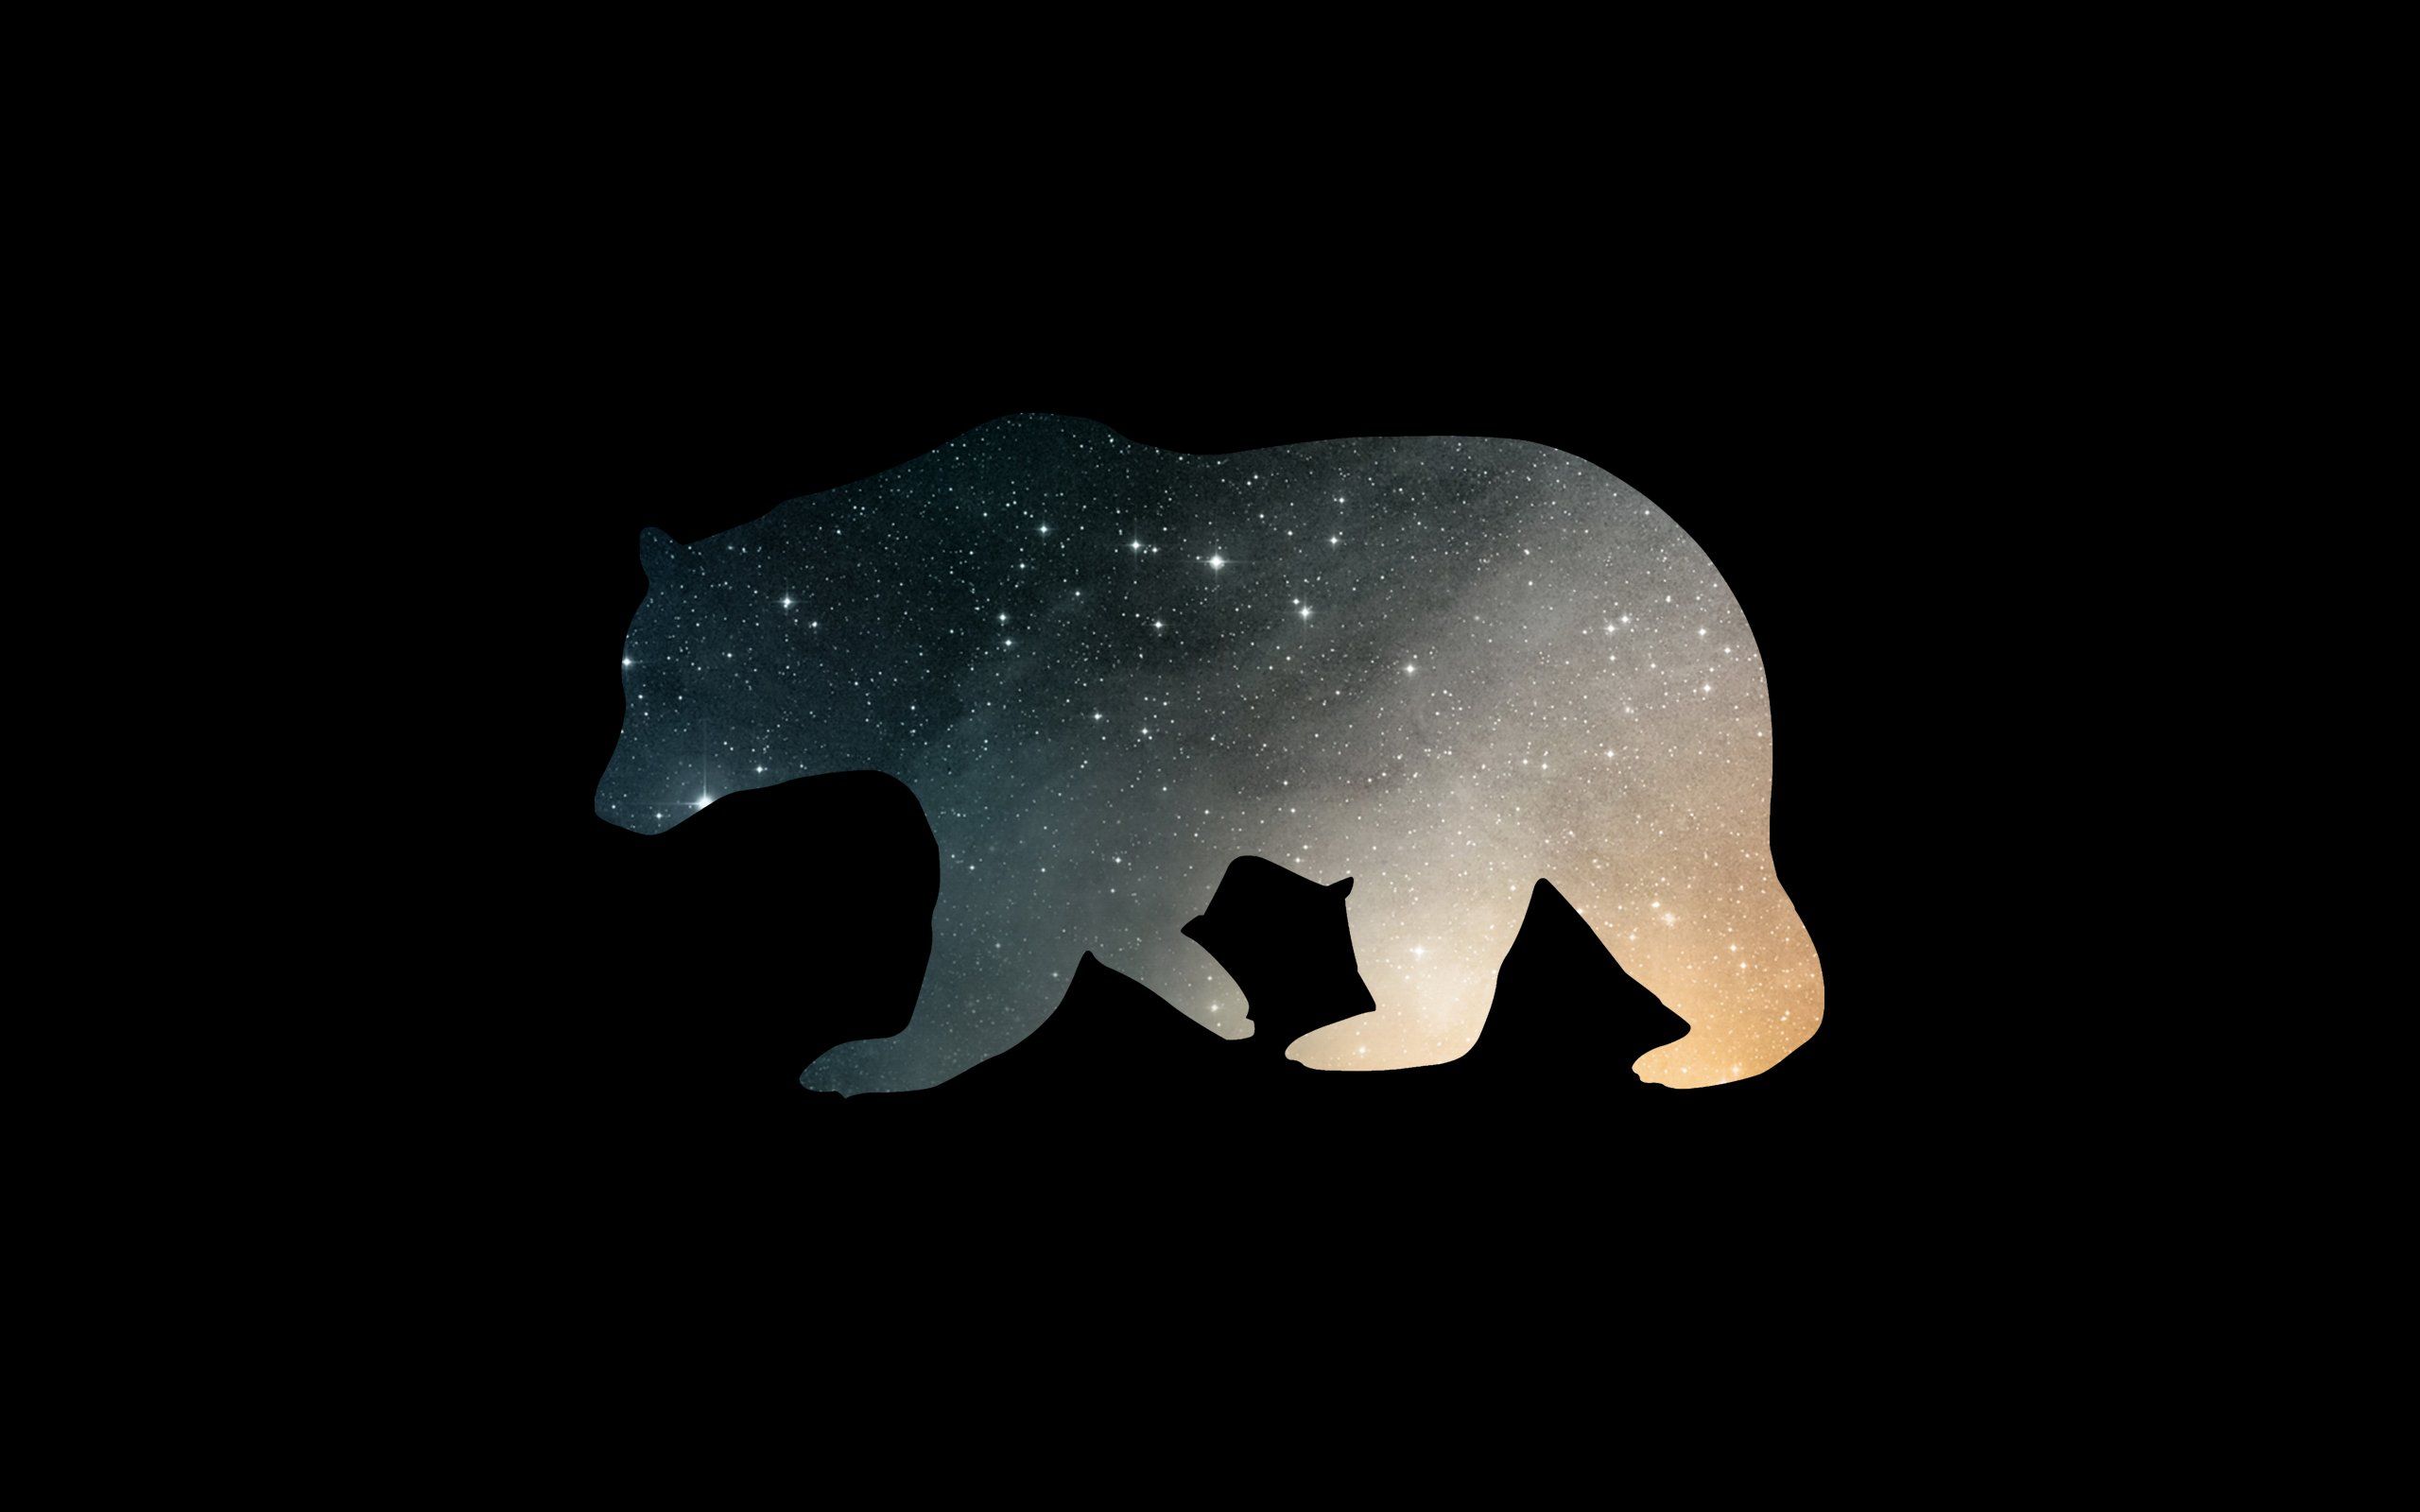 Bear 4K wallpaper for your desktop or mobile screen free and easy to download